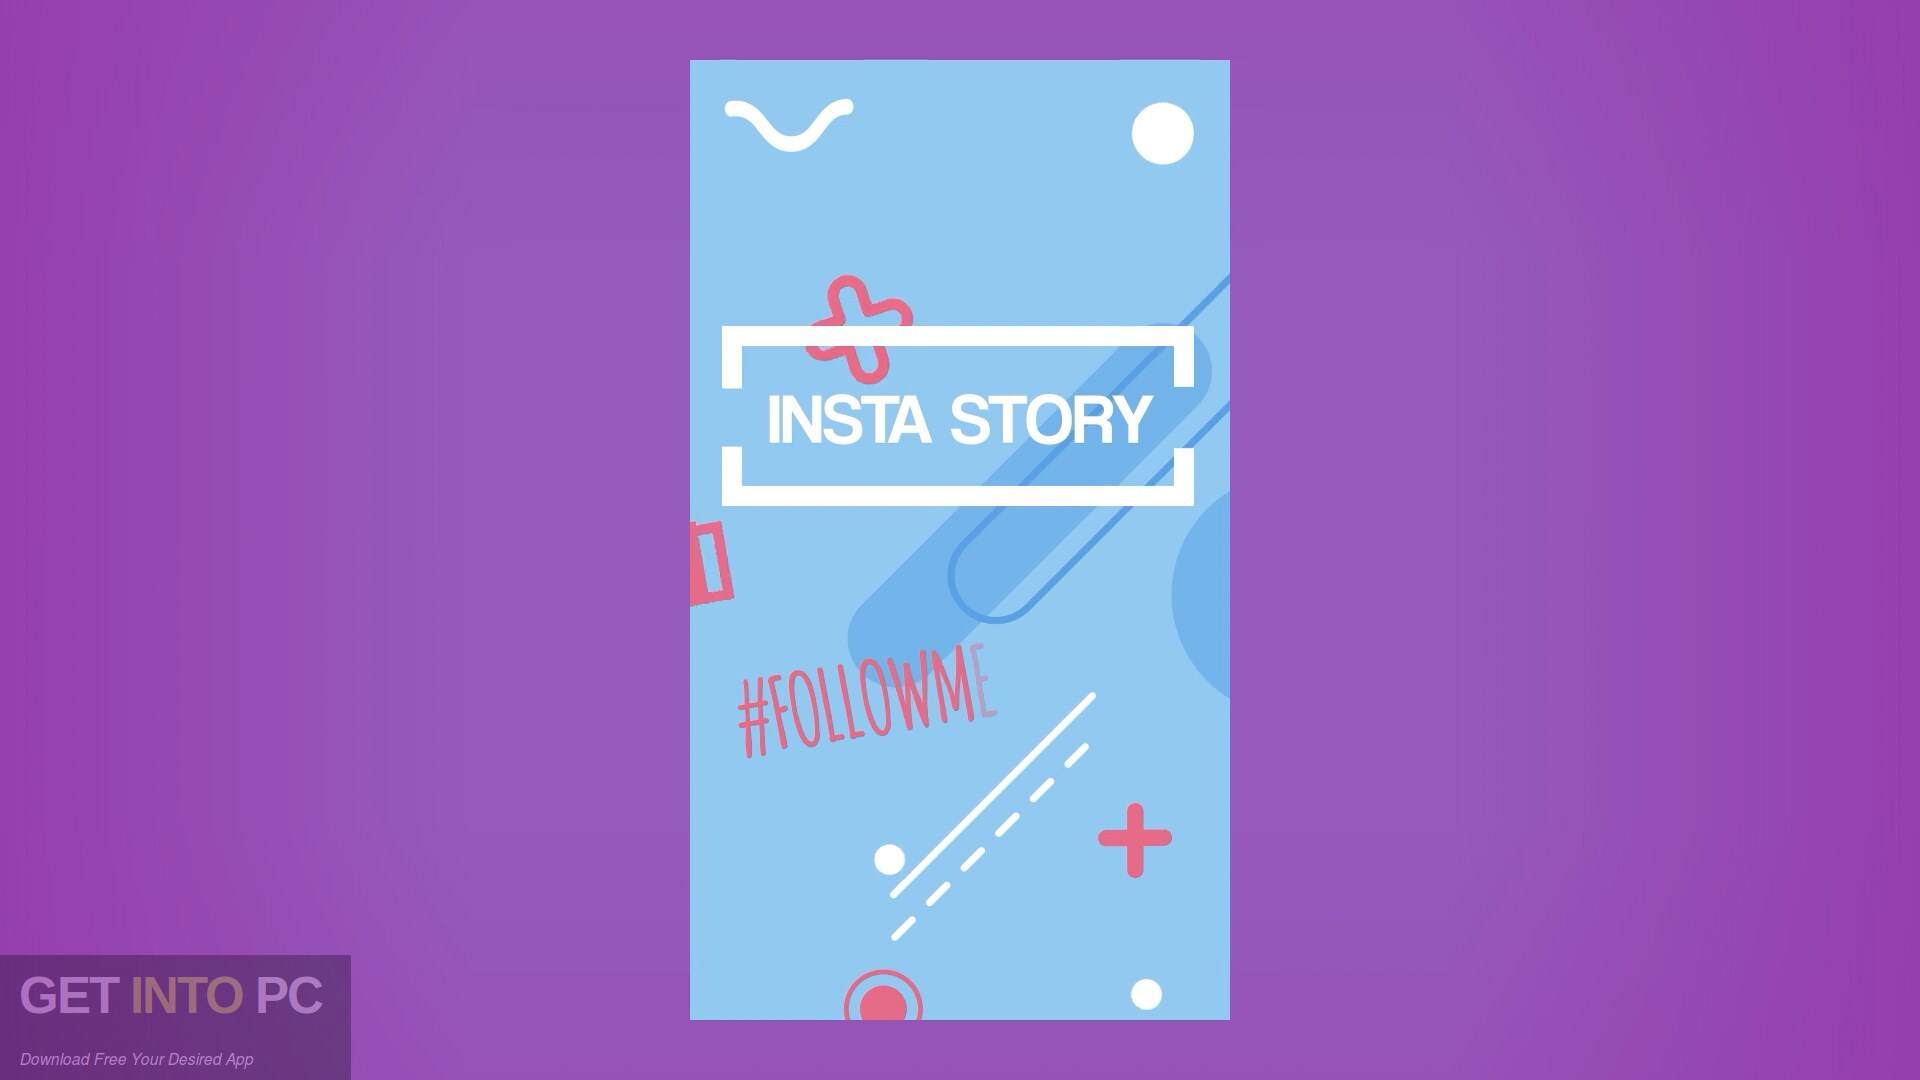 VideoHive - Abstract Insta Story Pack [AEP] Free Download